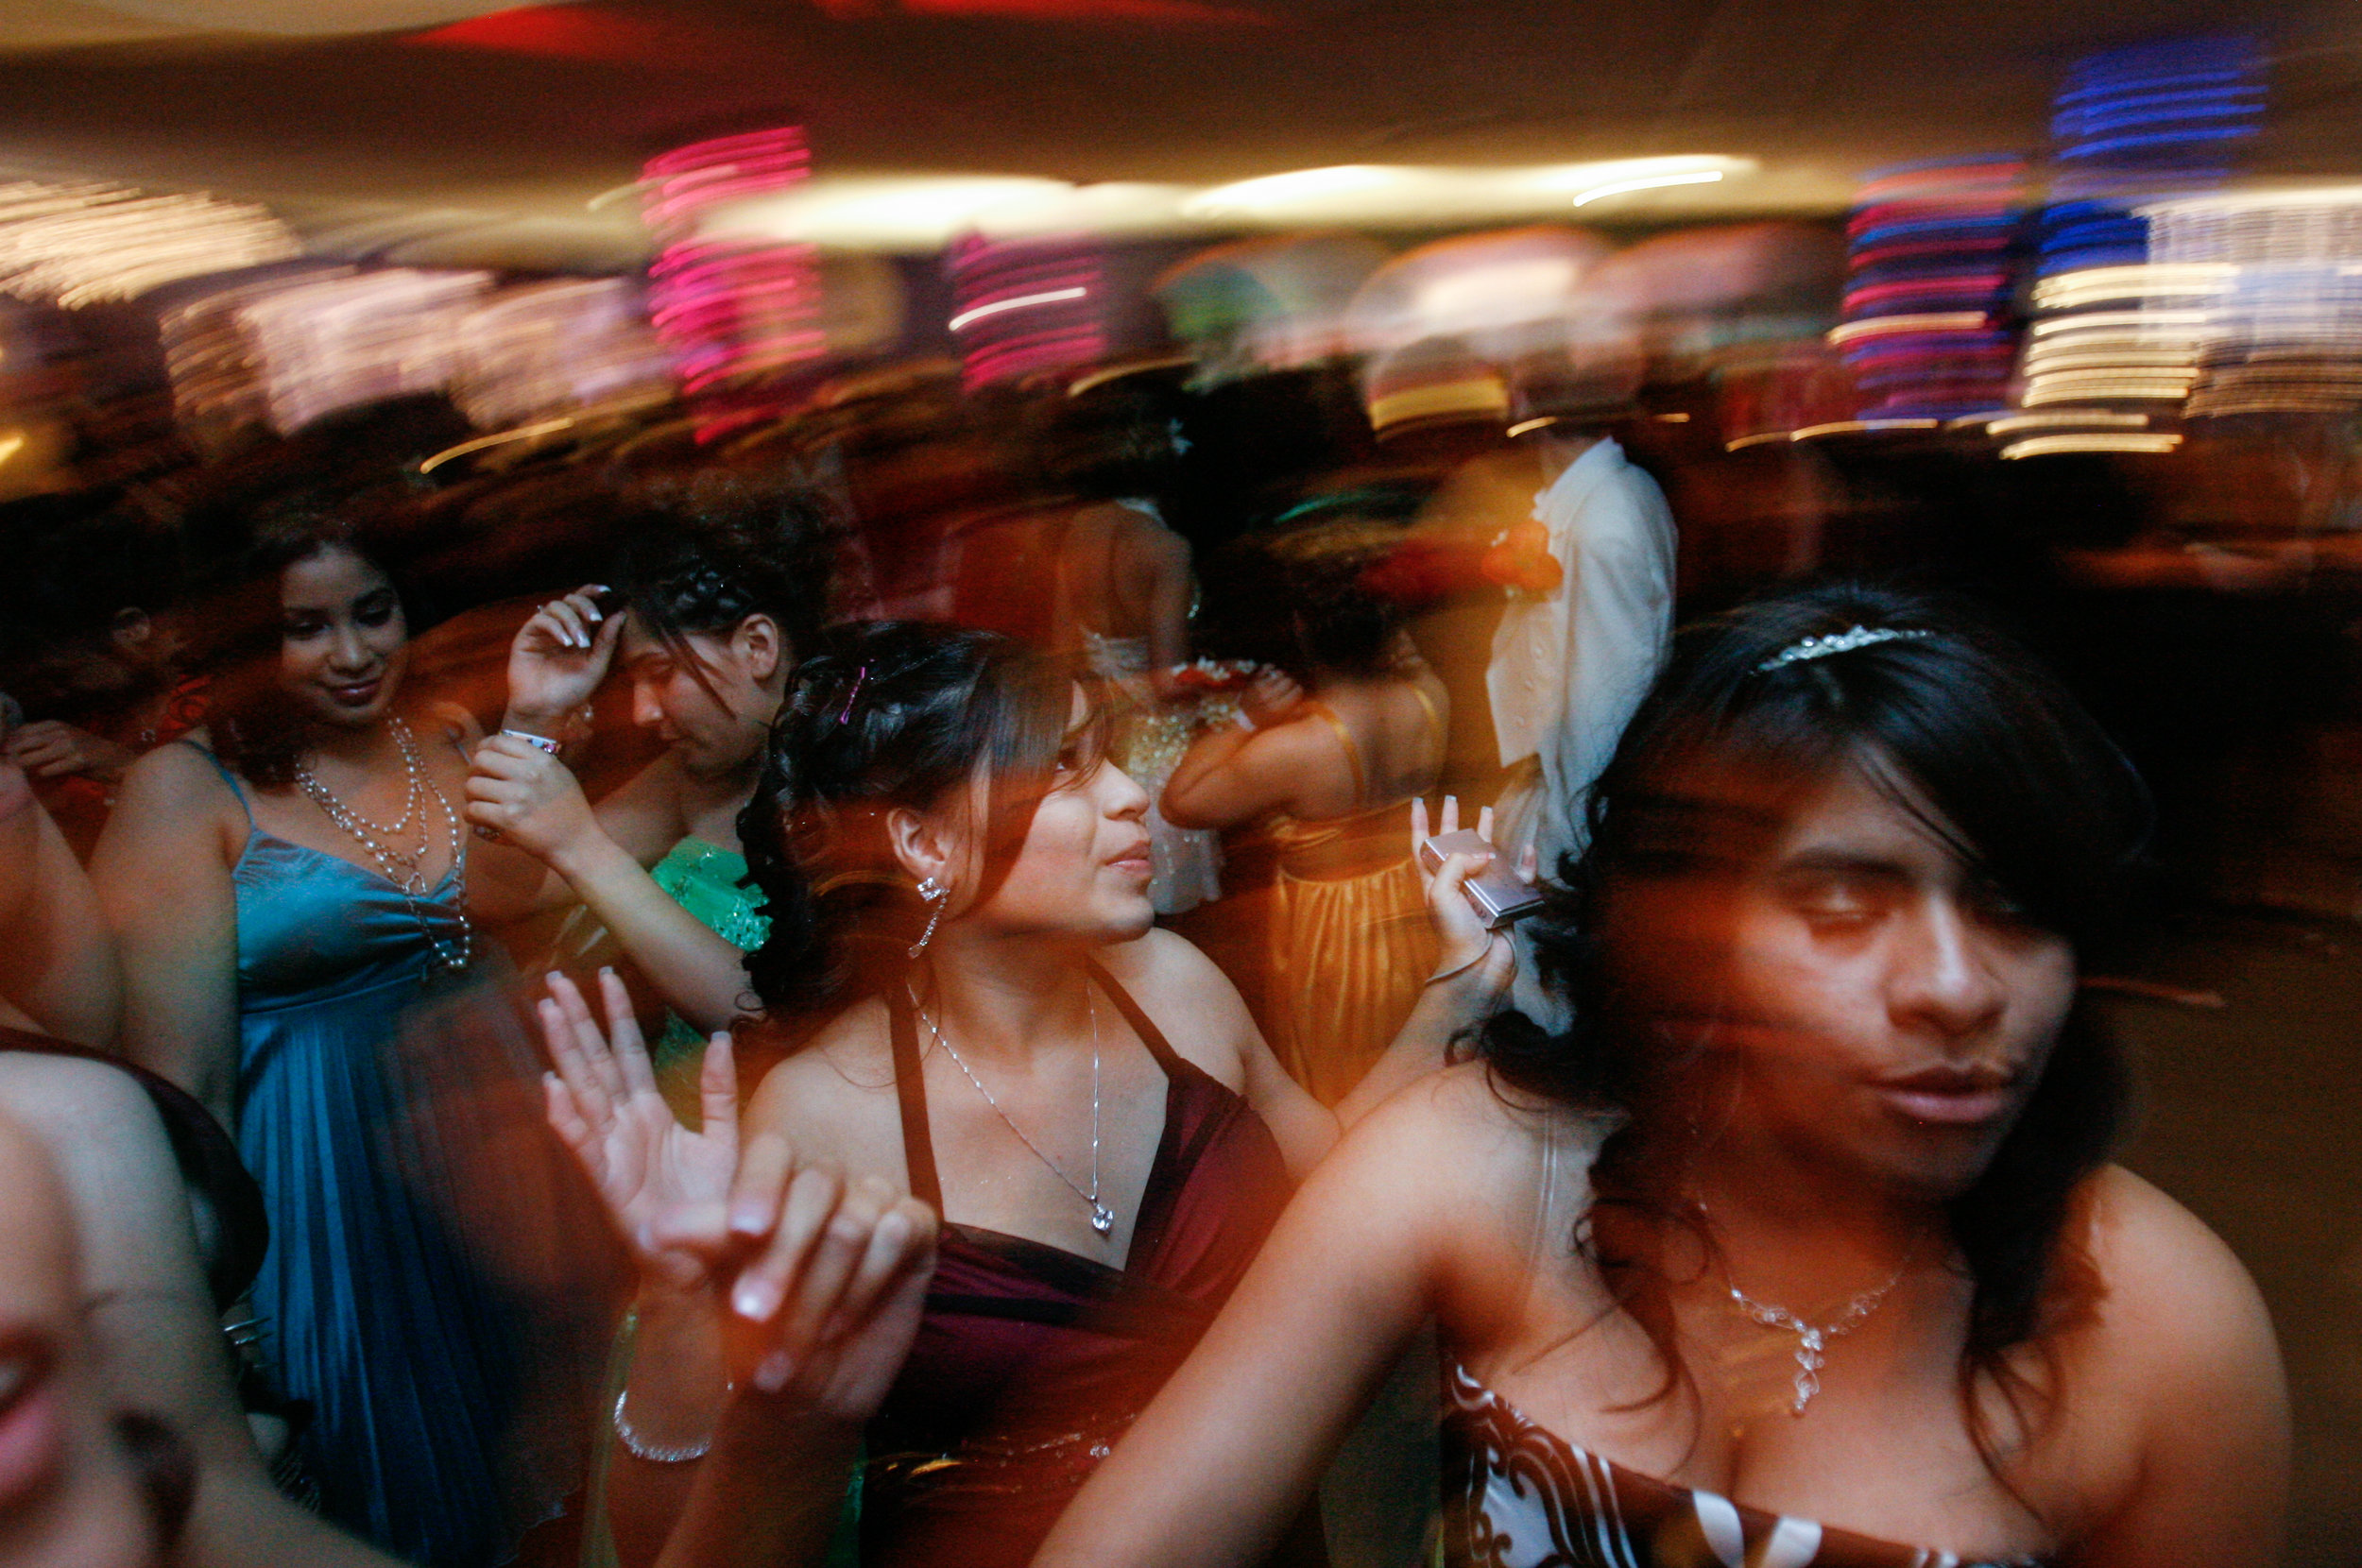  Deana Martinez, 17, center, dances at the Odessa High School prom April 26, 2008, at the Ector County Coliseum in Odessa, Texas. 